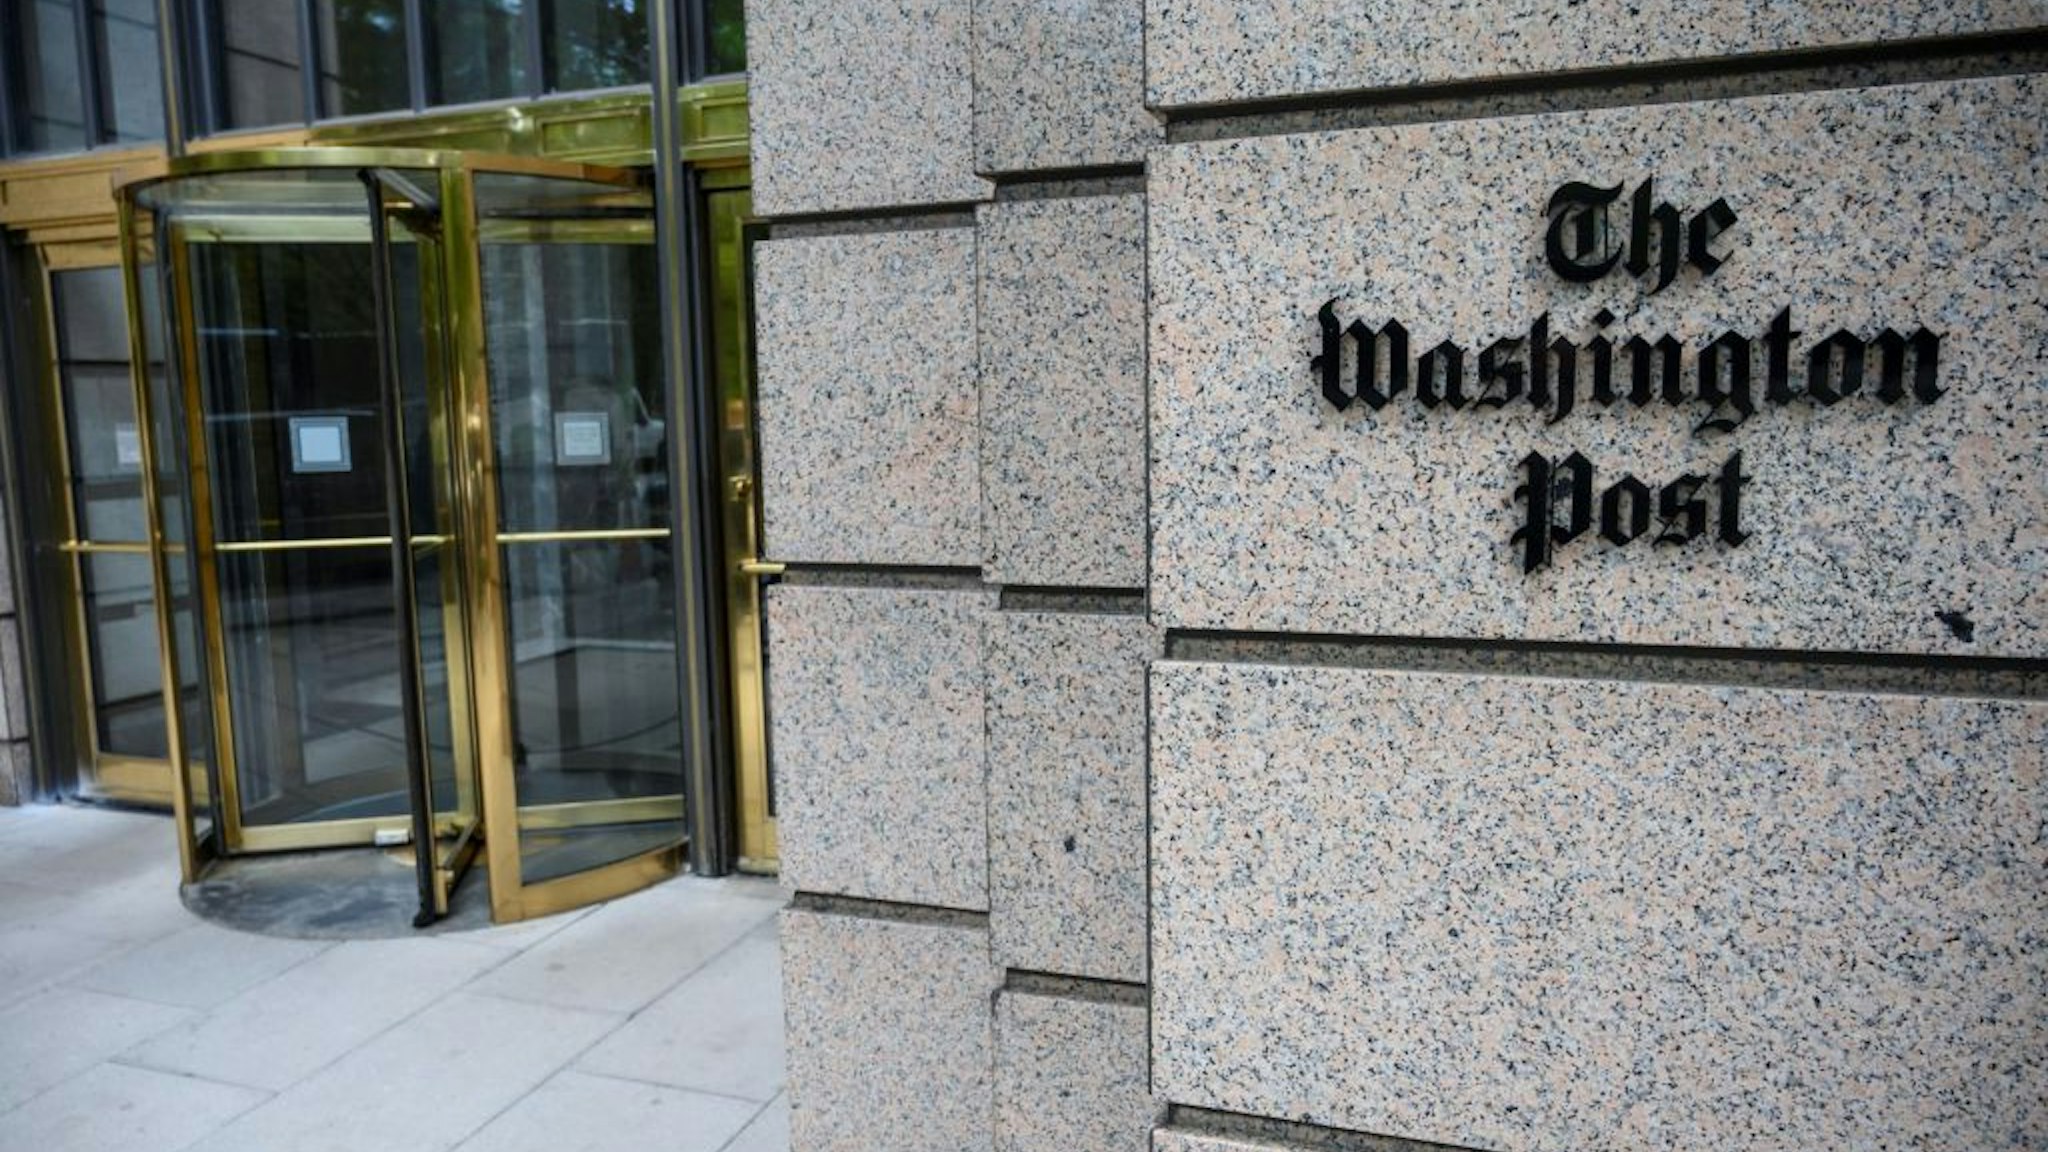 The building of the Washington Post newspaper headquarter is seen on K Street in Washington DC on May 16, 2019. - The Washington Post is a major American daily newspaper published in Washington, D.C., with a particular emphasis on national politics and the federal government. It has the largest circulation in the Washington metropolitan area.